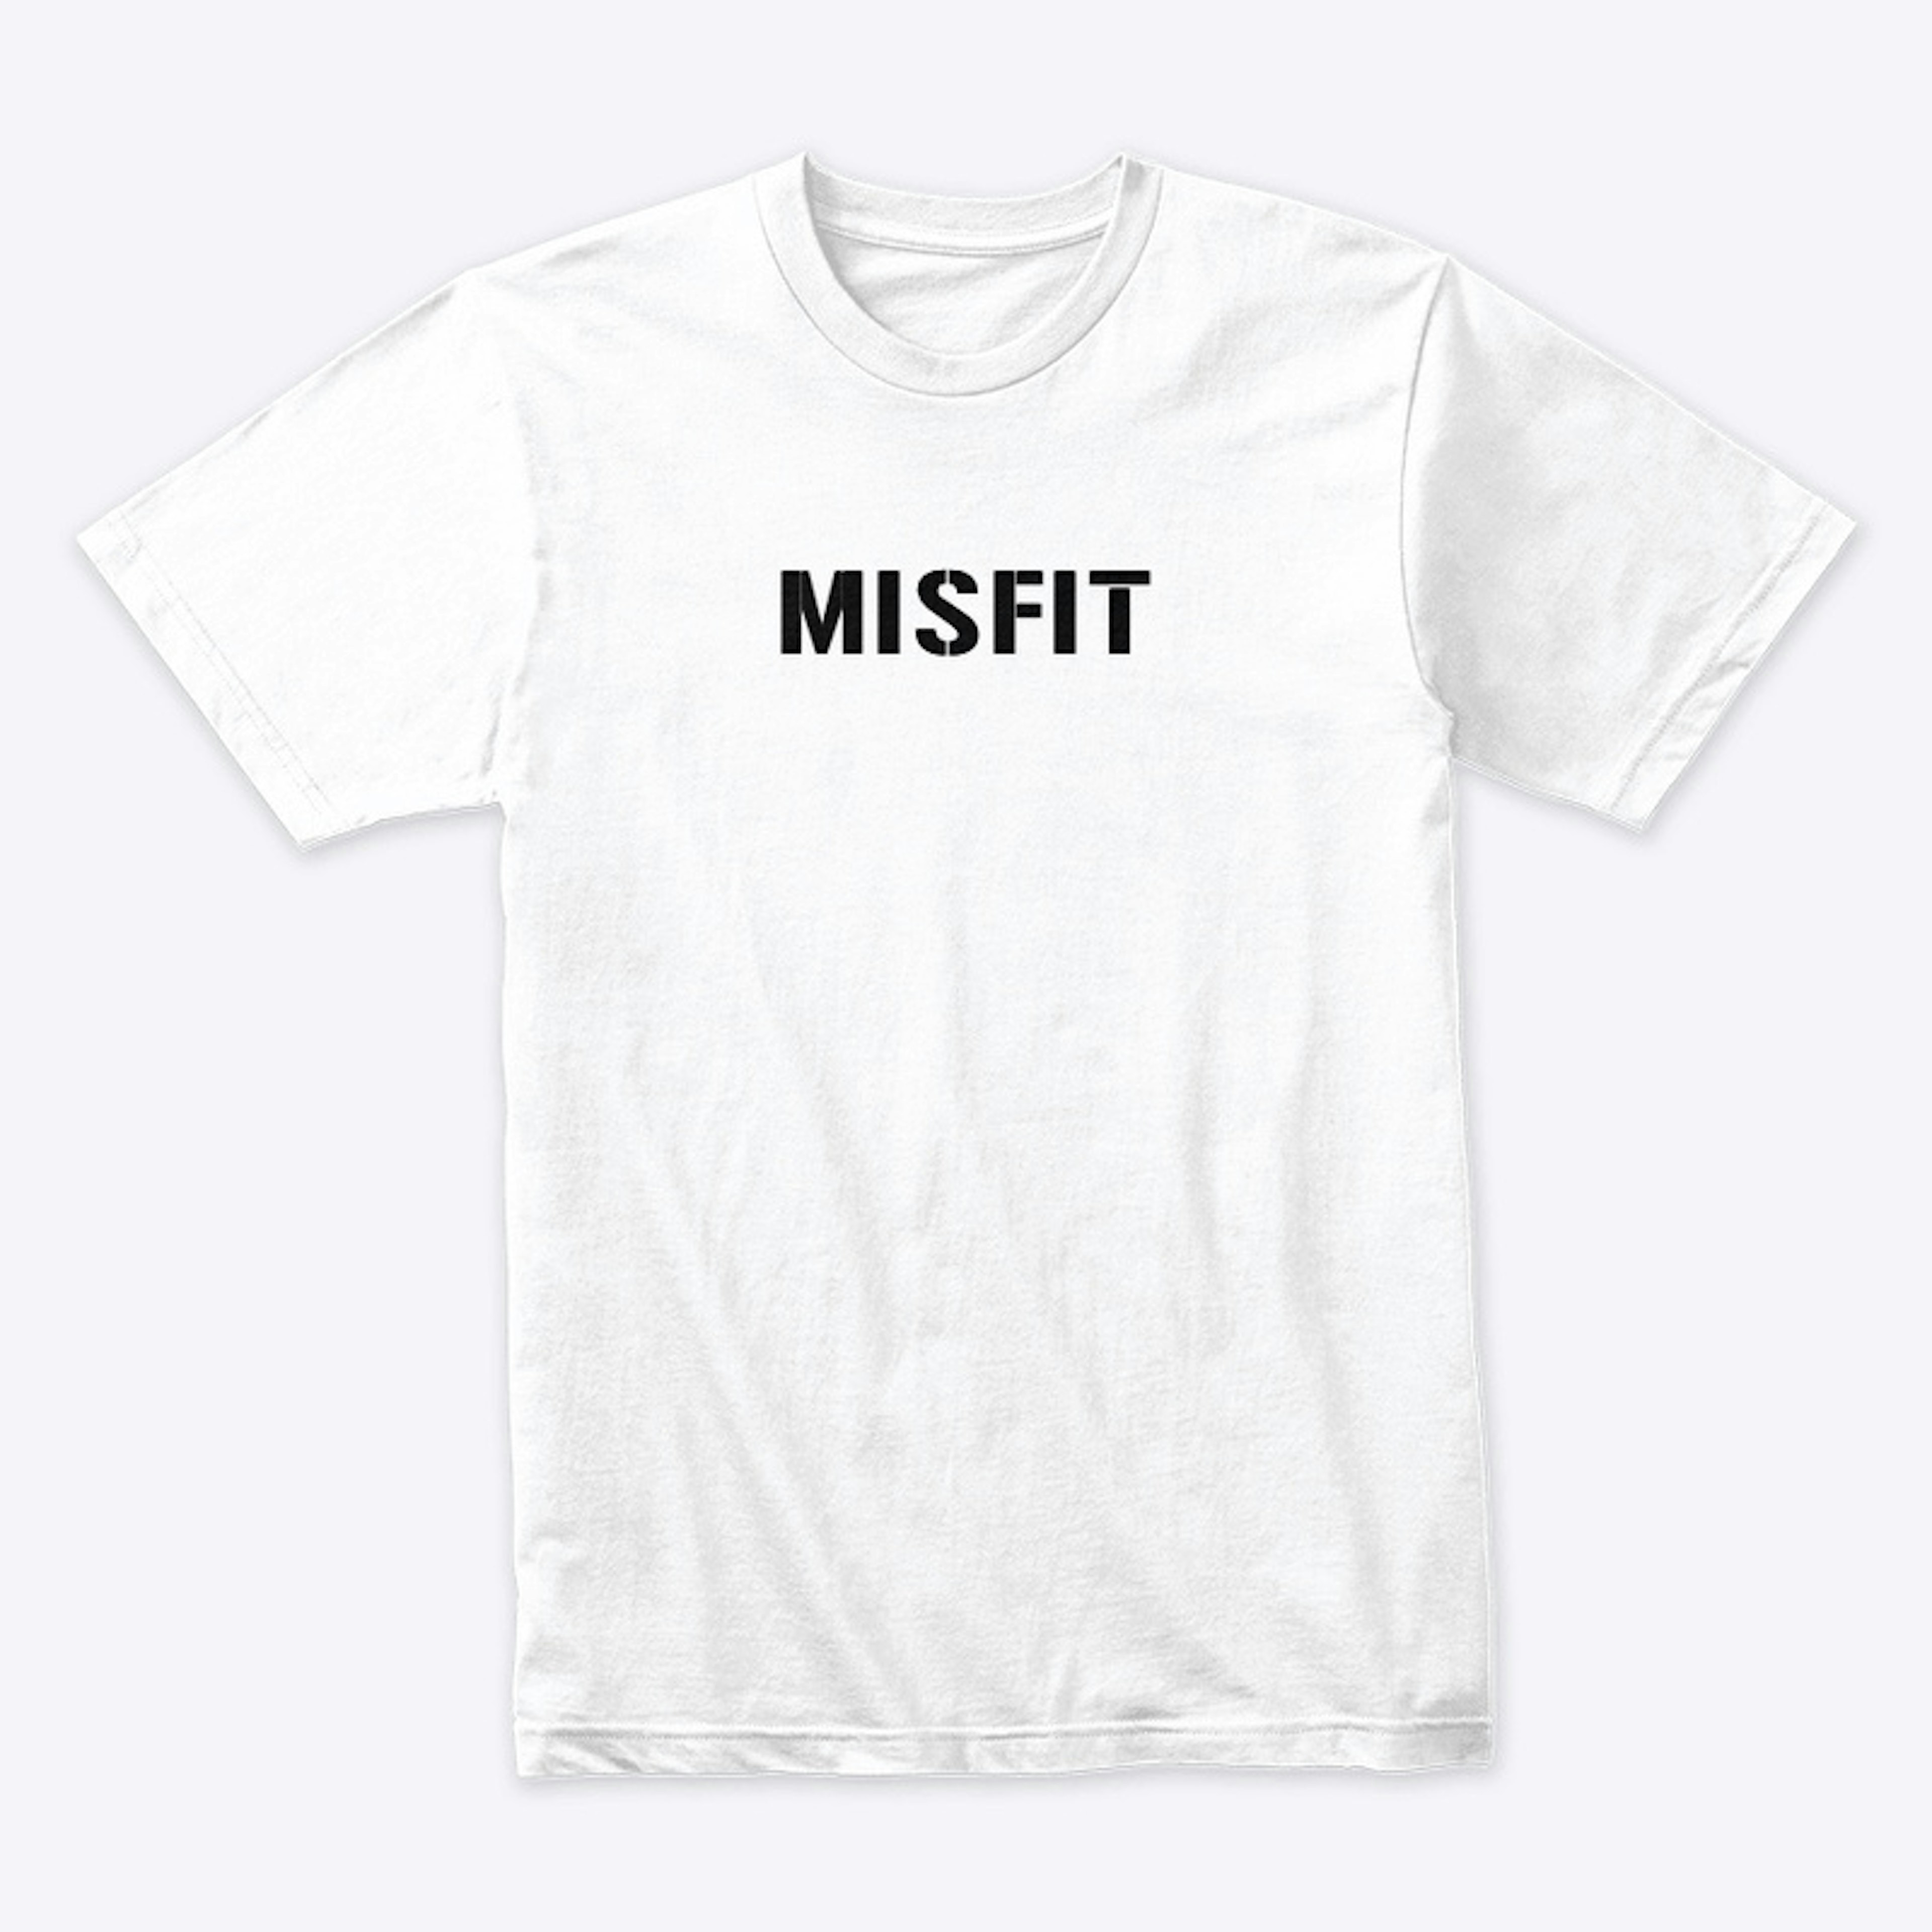 MISFIT Collection (Light)